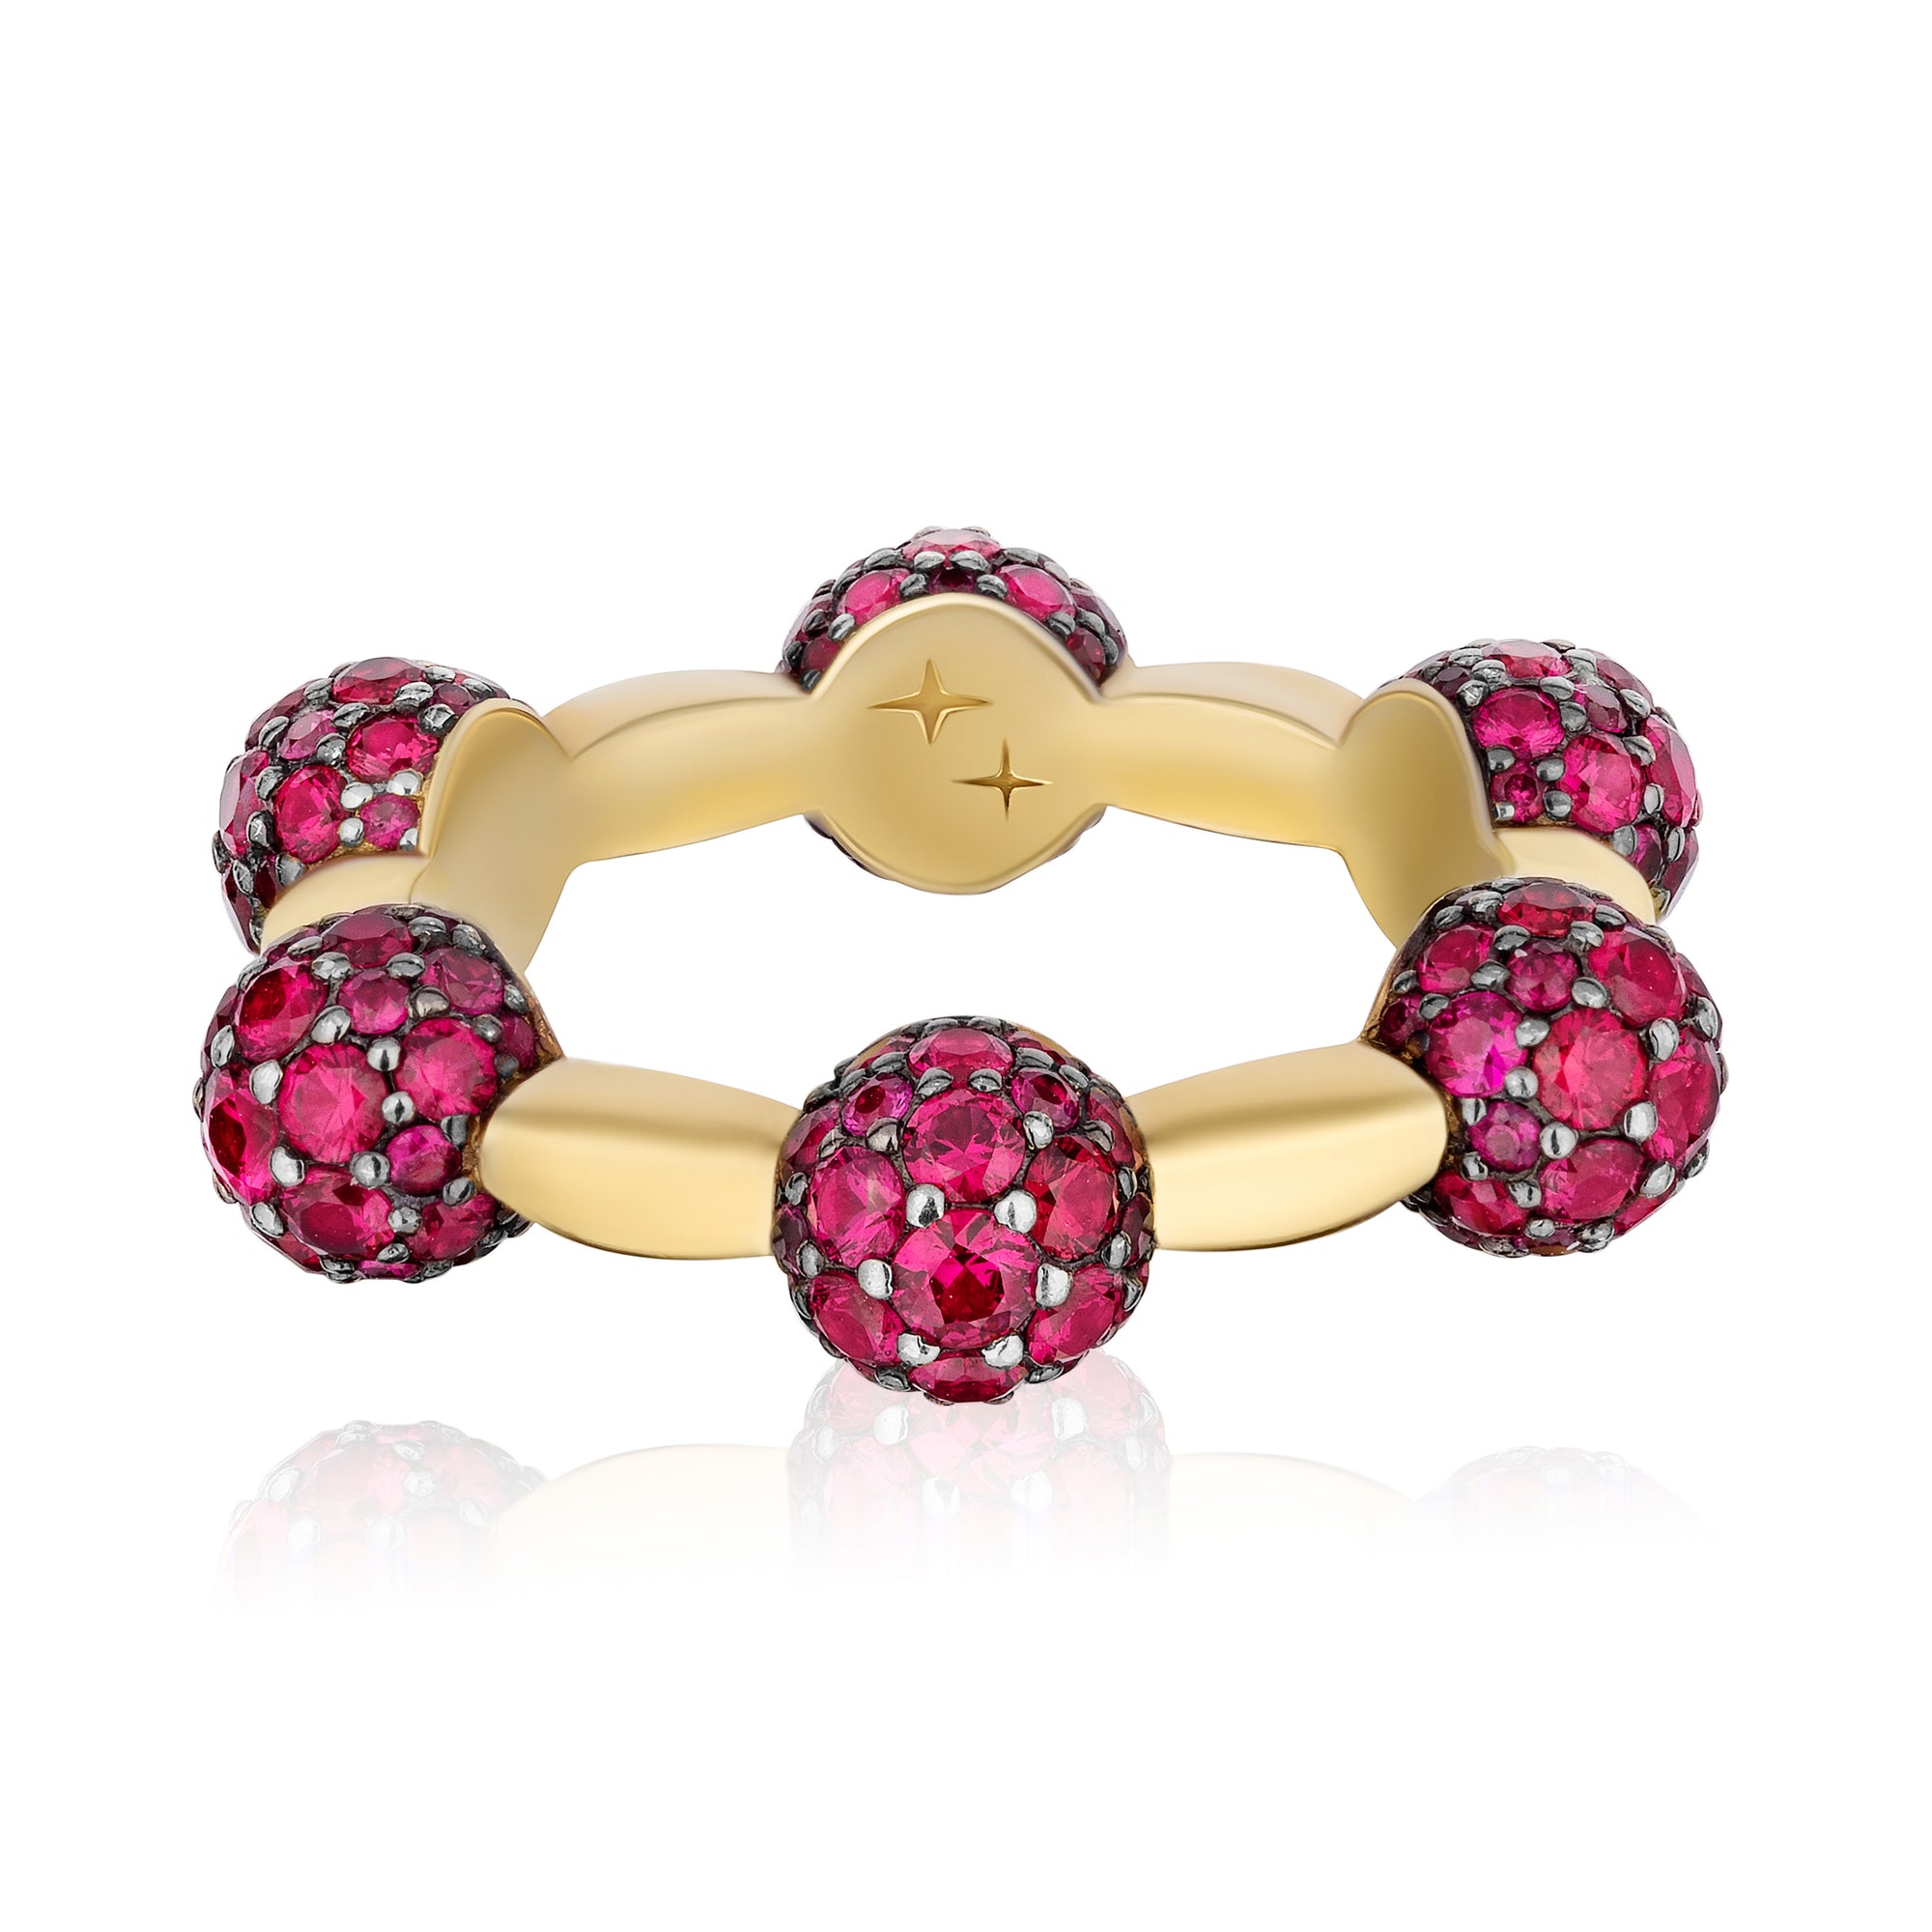 Celestial Ring in Yellow Gold with Rubies